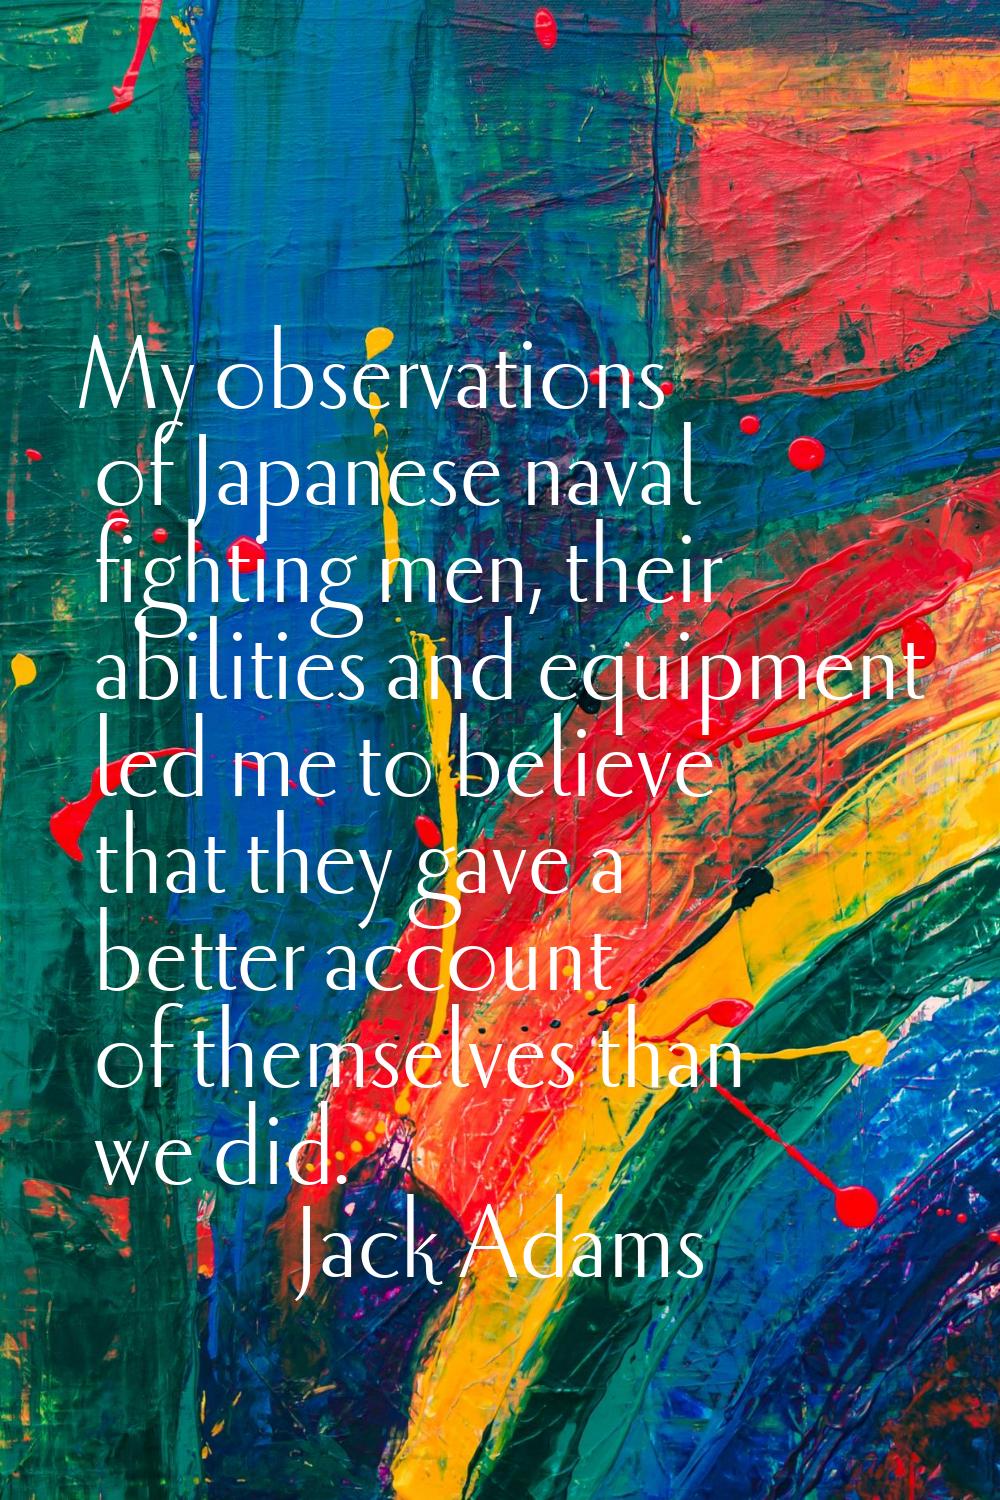 My observations of Japanese naval fighting men, their abilities and equipment led me to believe tha